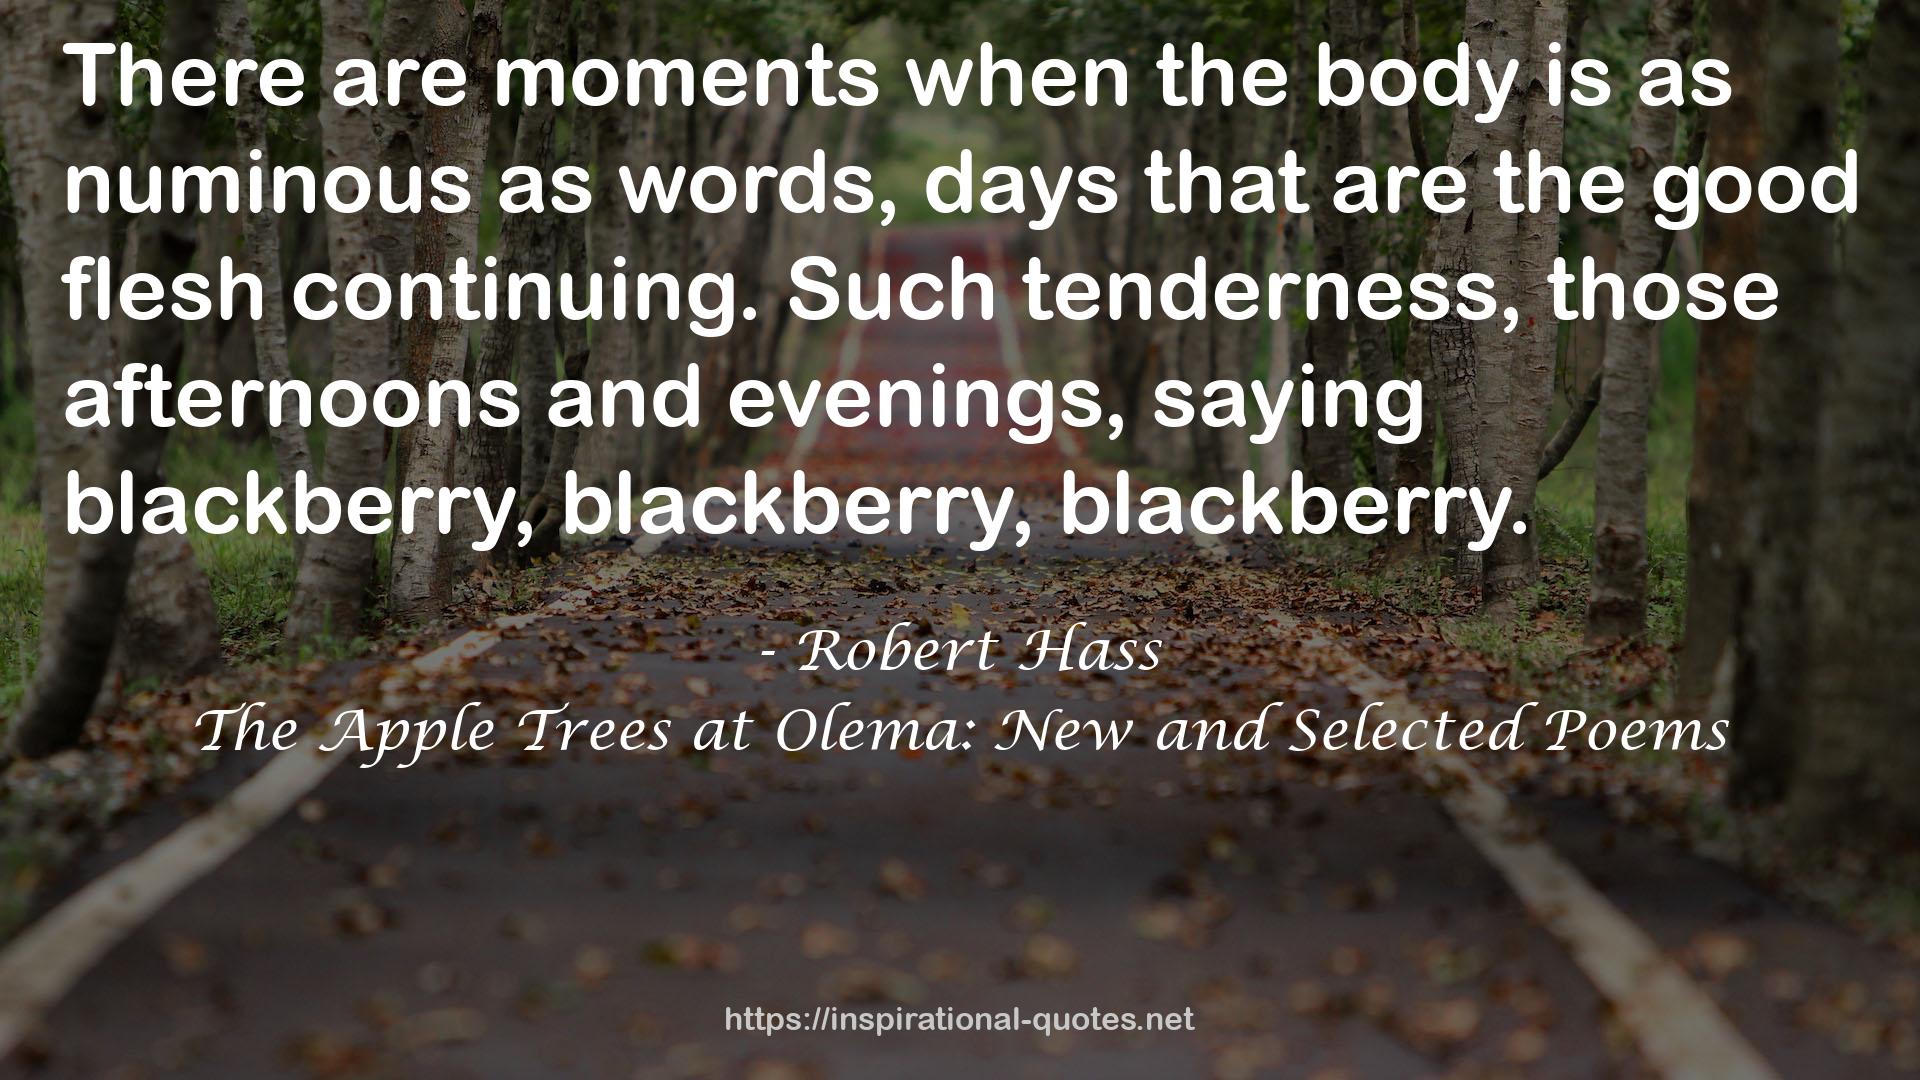 The Apple Trees at Olema: New and Selected Poems QUOTES